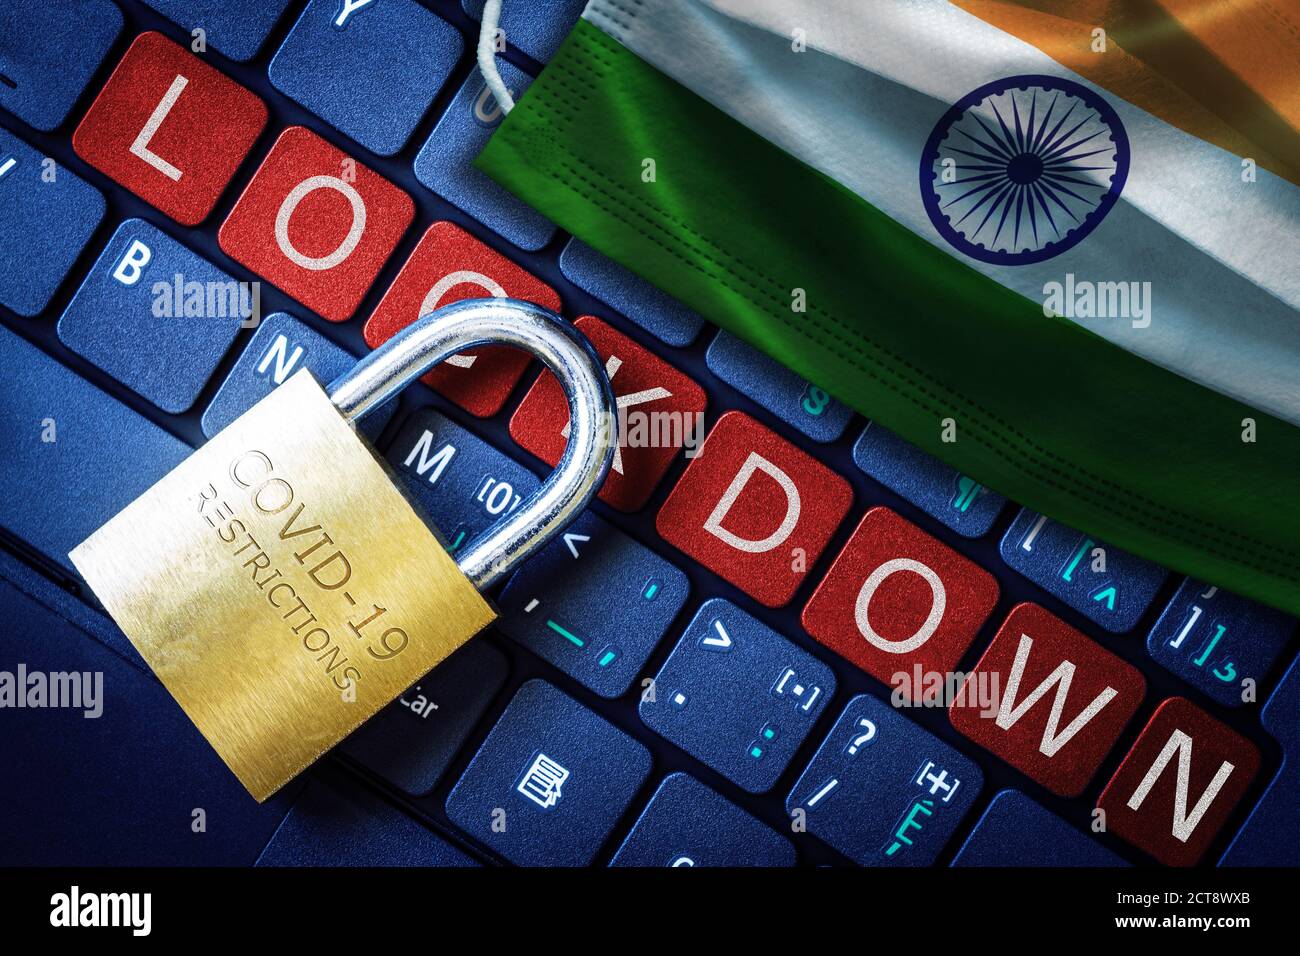 India COVID-19 coronavirus lockdown restrictions concept illustrated by padlock on laptop red alert keyboard buttons and face mask with Indian flag. Stock Photo